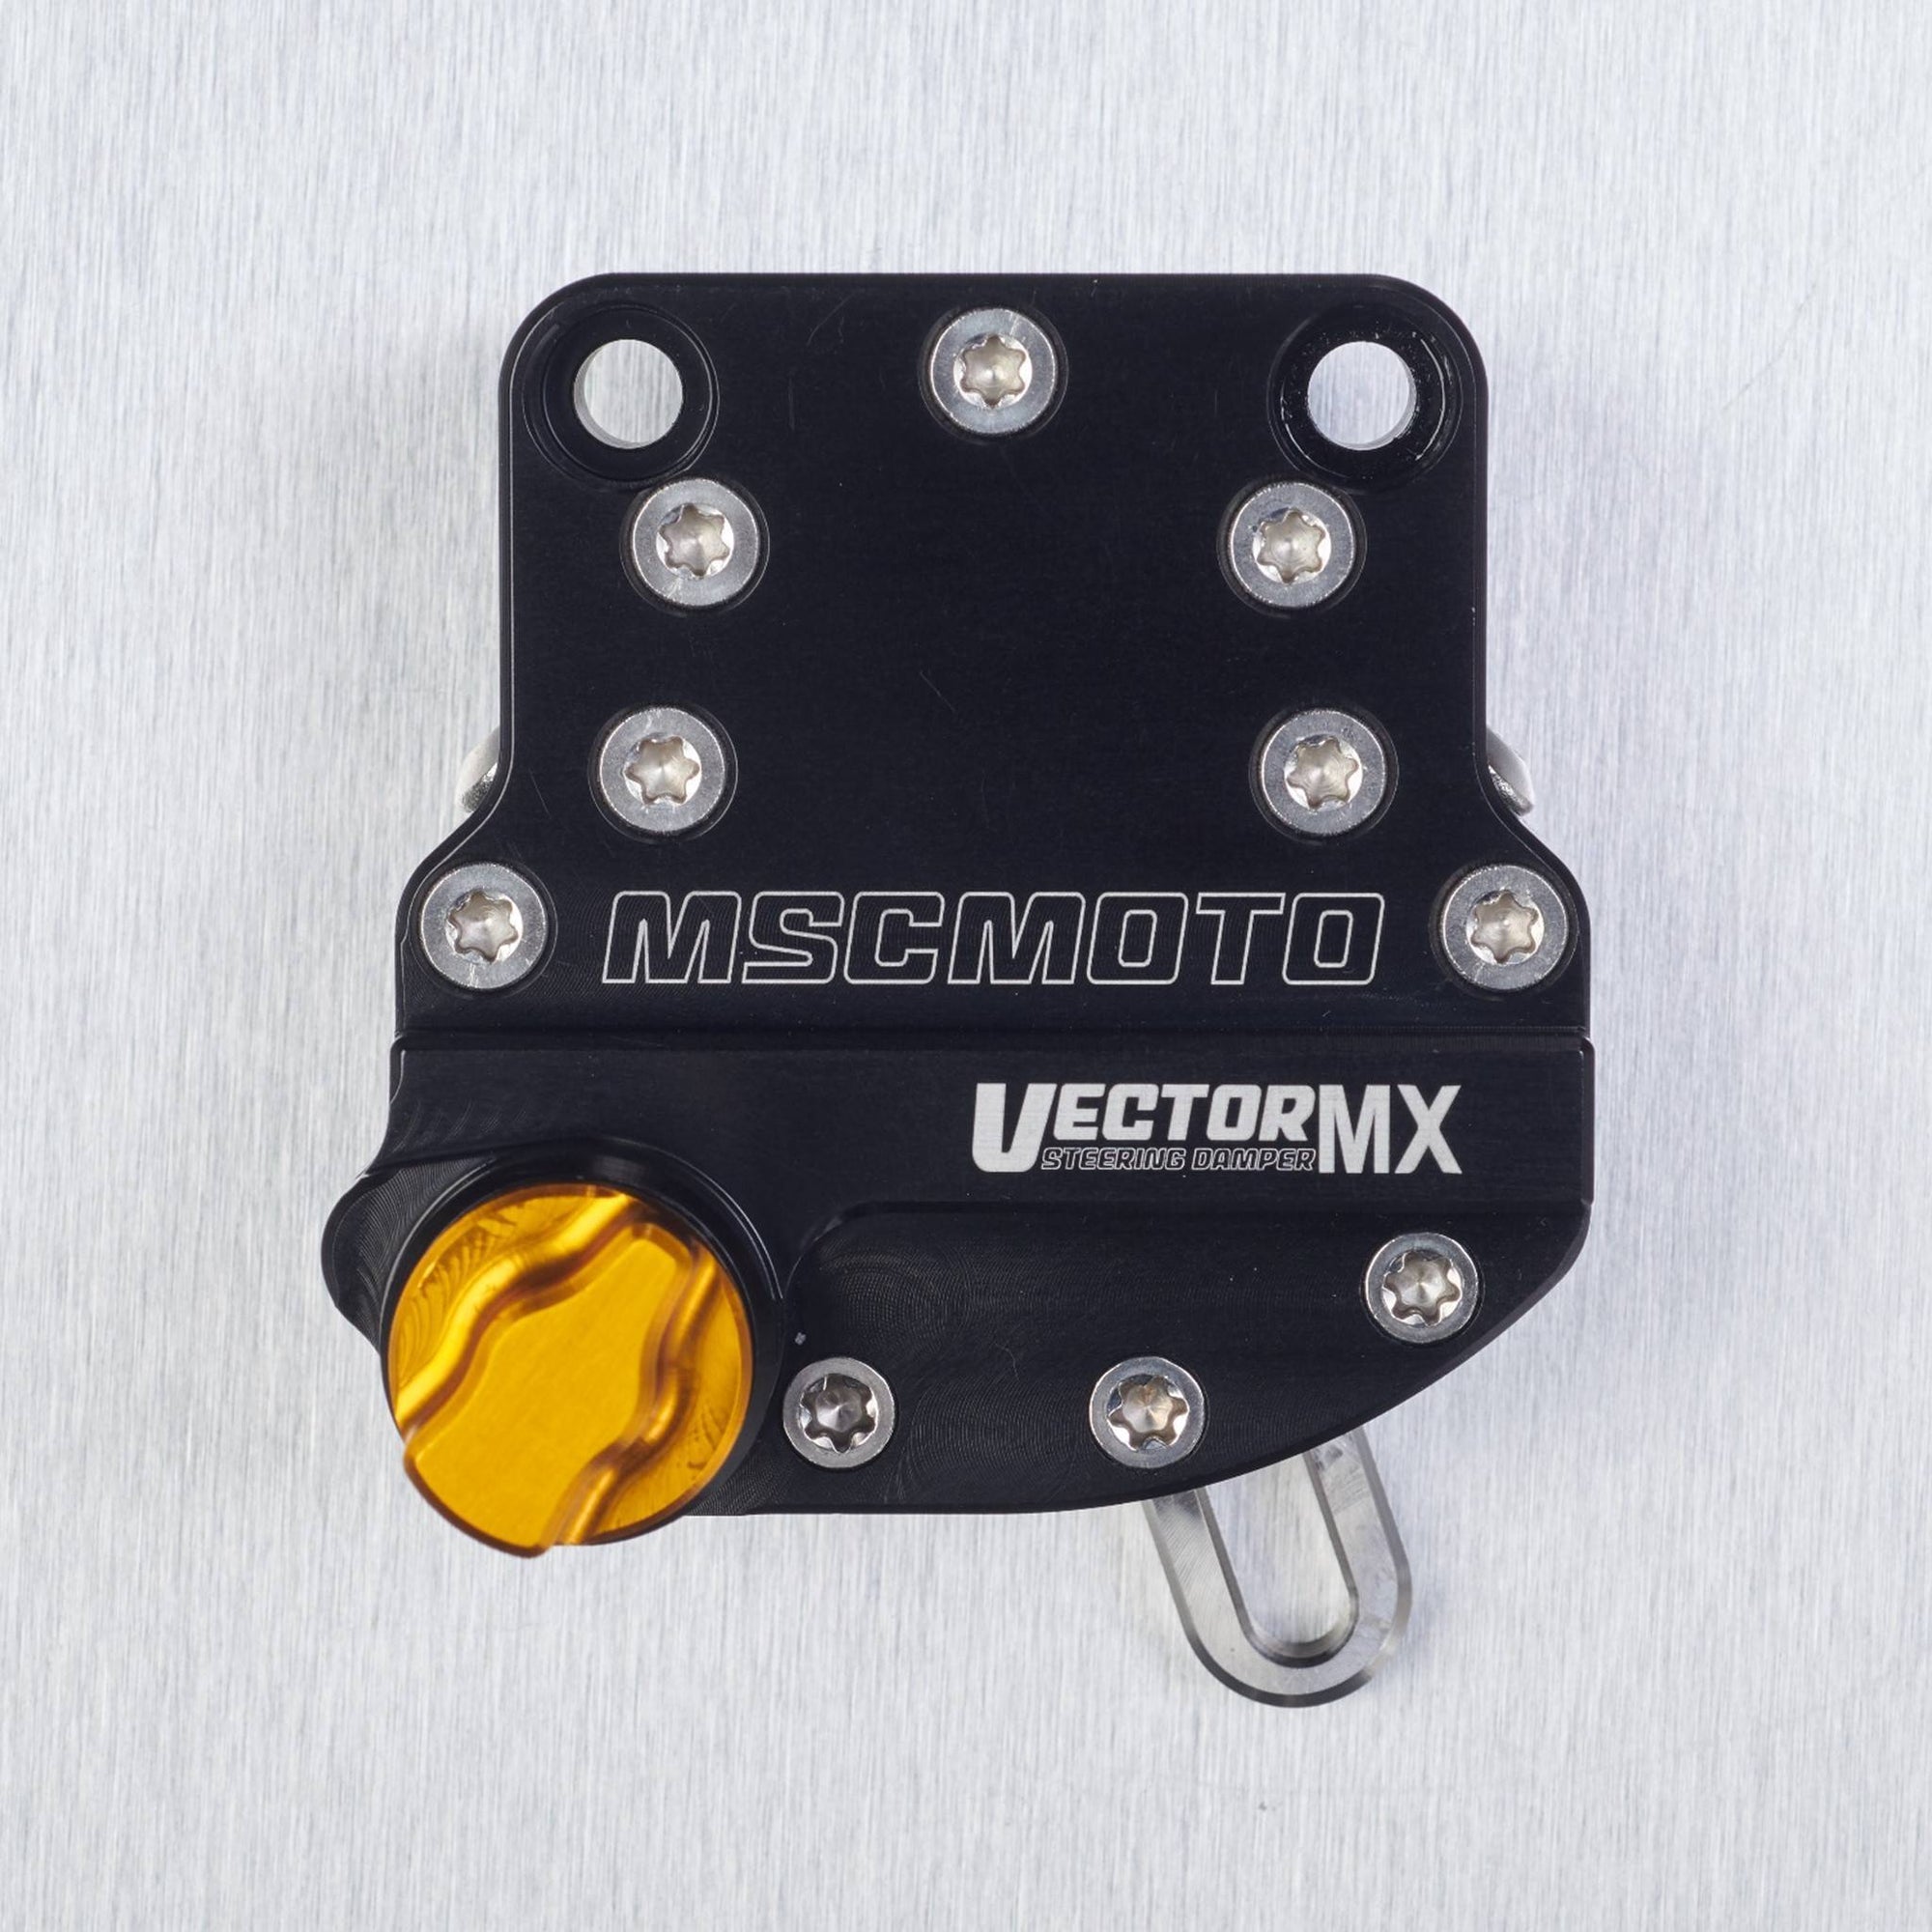 mscmotousa, VectorMX Steering Damper Kit "Down Under" Mount (VEC0008) - SHERCO SEF-F, VEC0008, sherco, sherco-2018-450-sef-f-esi7035460, vectormx, , Imported and distributed in North & South America by Lindeco Genuine Powersports.